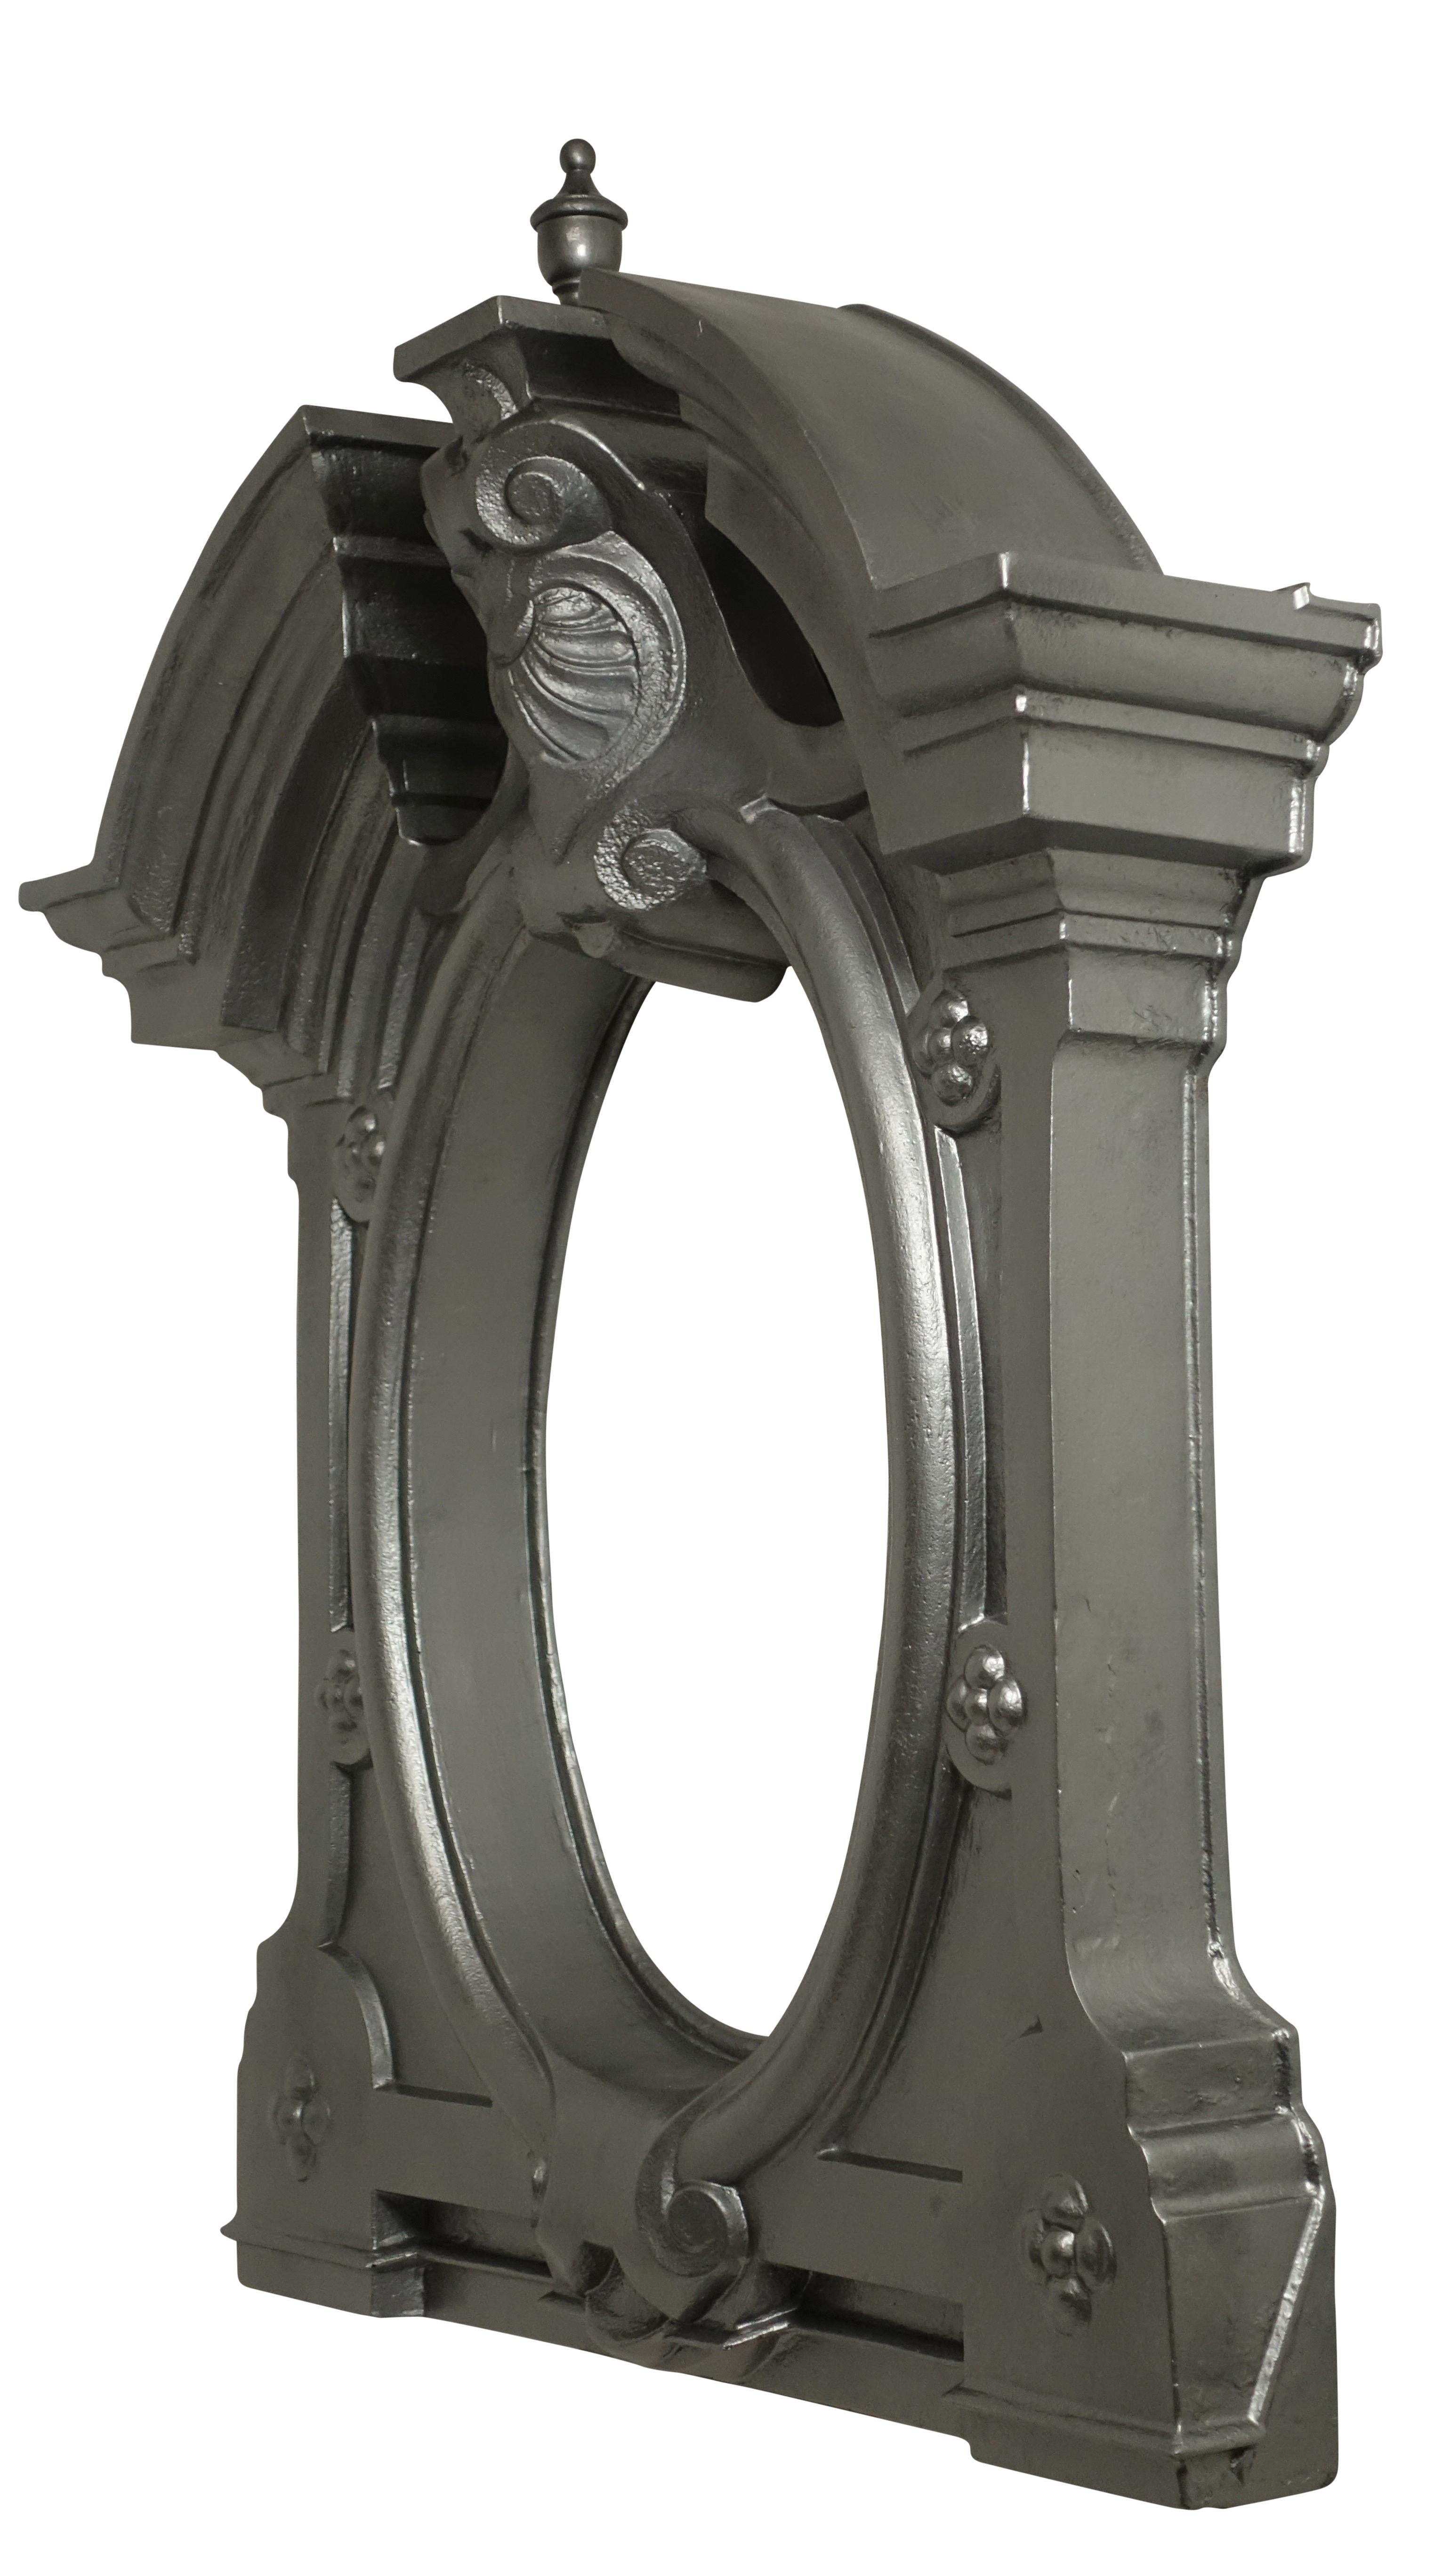 A zinc colored European style dormer window frame made from a composition material. Last quarter of the 20th century. Window opening dimensions: Height-22.5 inches, width-18.5 inches.